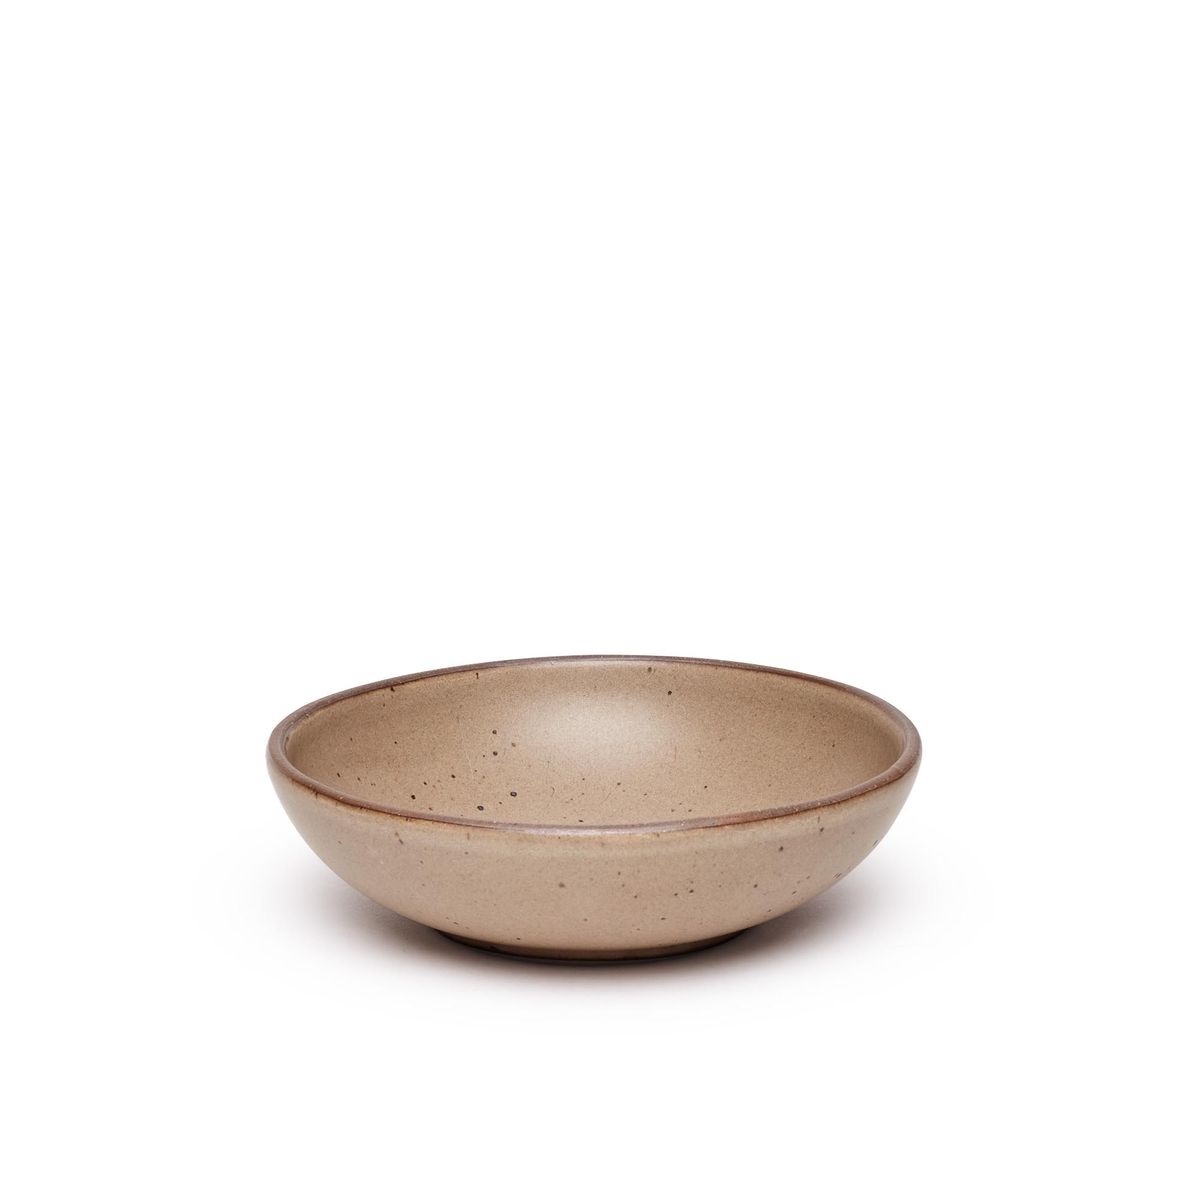 A dinner-sized shallow ceramic bowl in a warm pale brown color featuring iron speckles and an unglazed rim